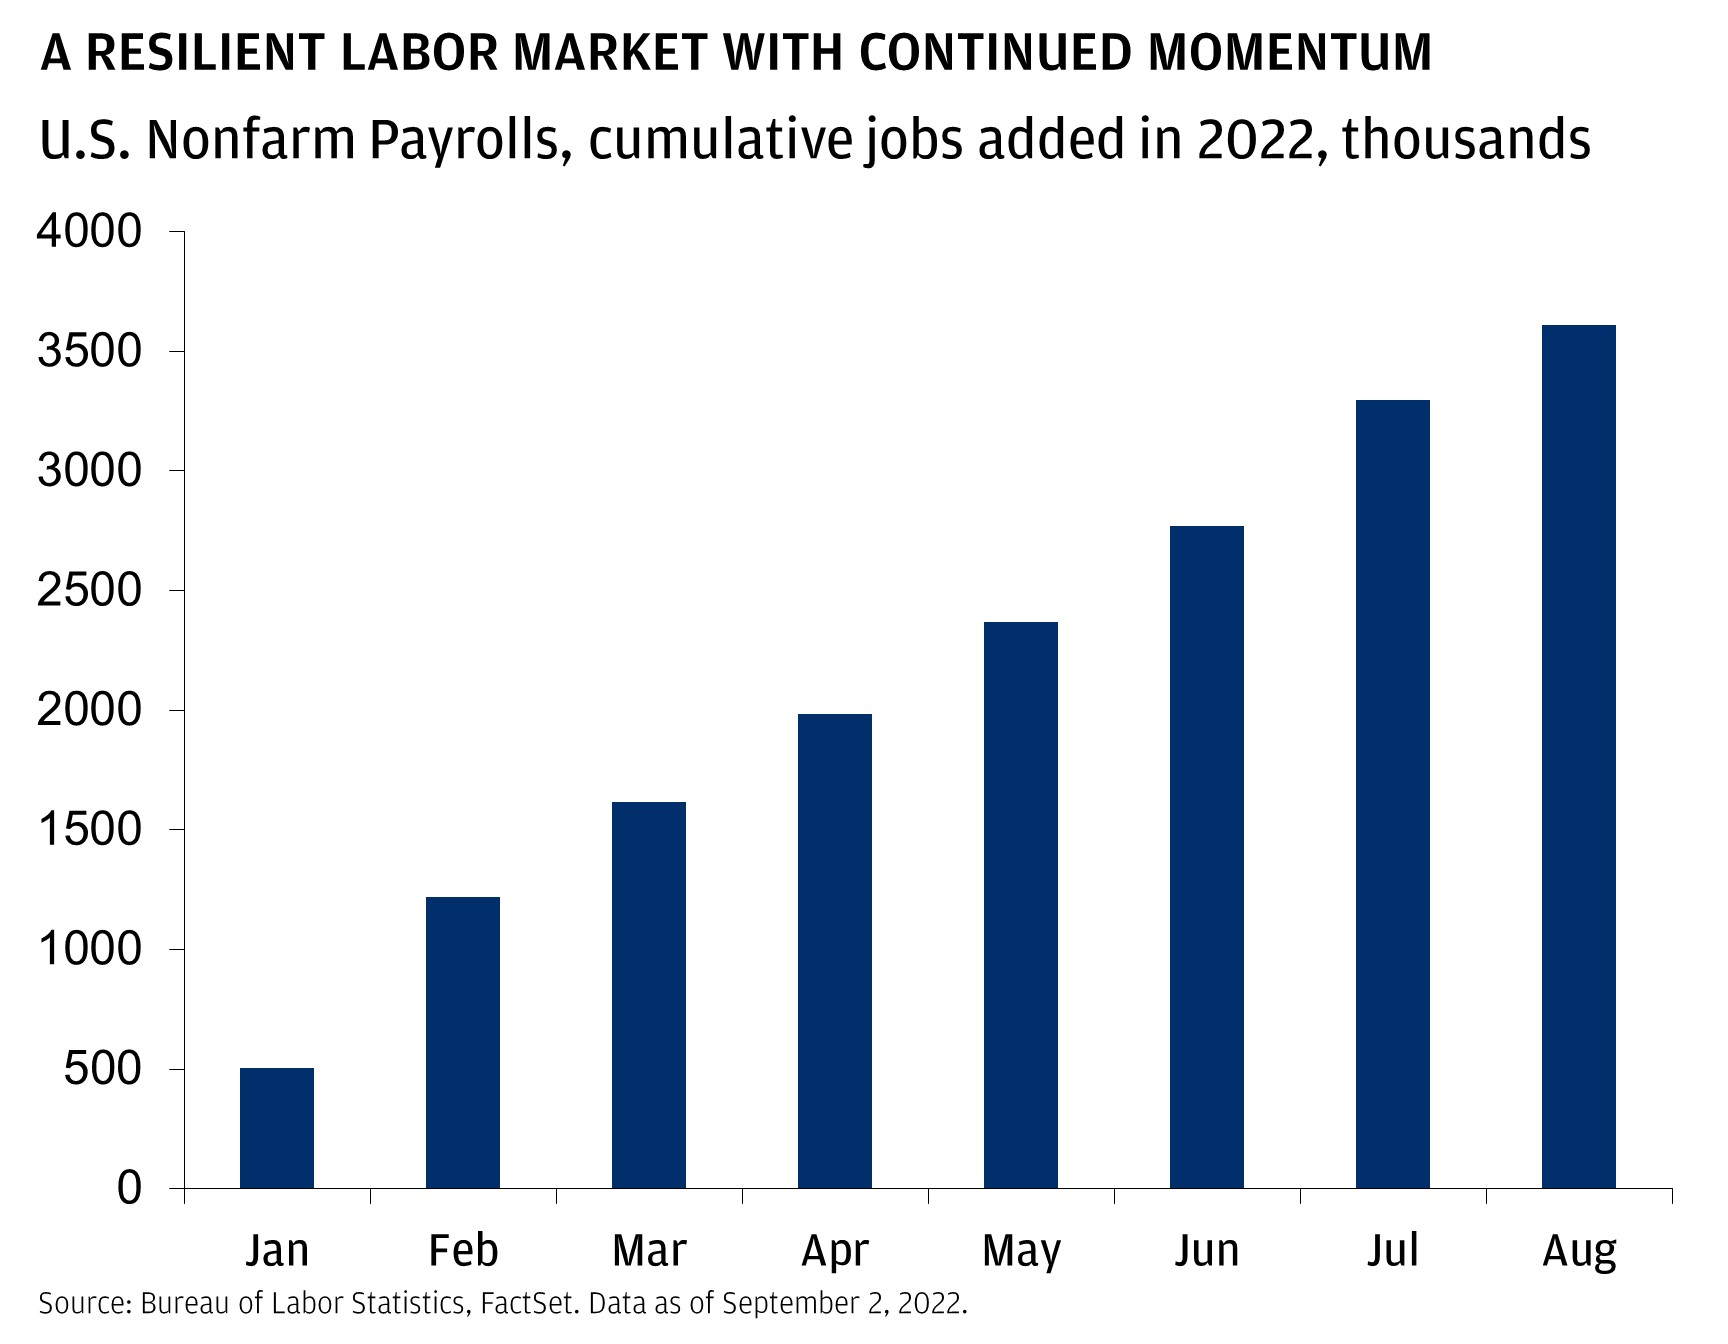 This chart shows U.S. nonfarm payrolls, cumulative jobs added year-to-date in 2022 from January through July, plus the consensus expectations for August 2022.